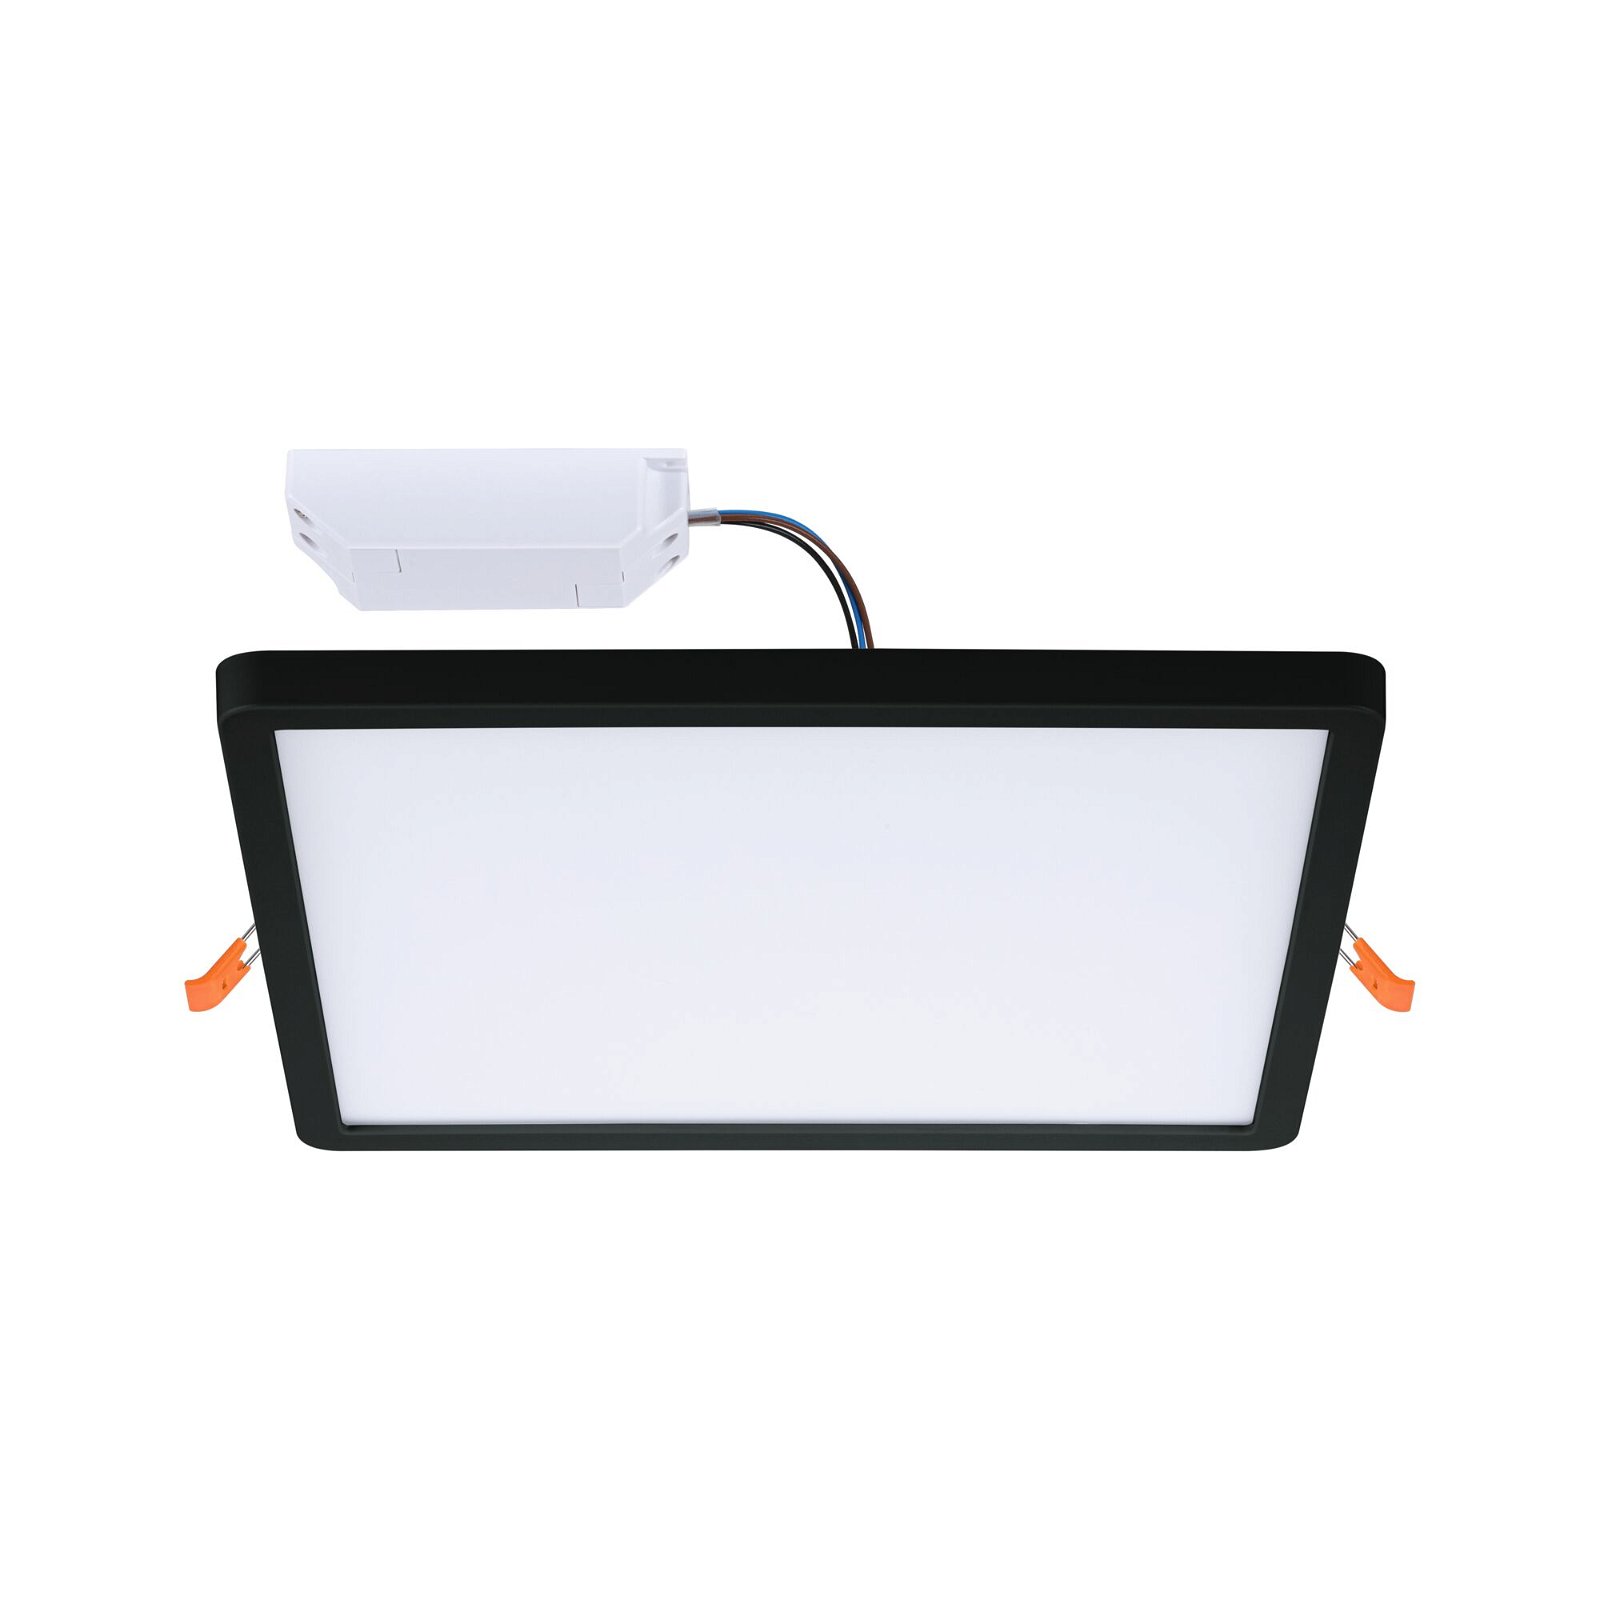 VariFit LED Recessed panel Smart Home Zigbee Areo IP44 square 230x230mm 16W 1400lm Tunable White Black dimmable